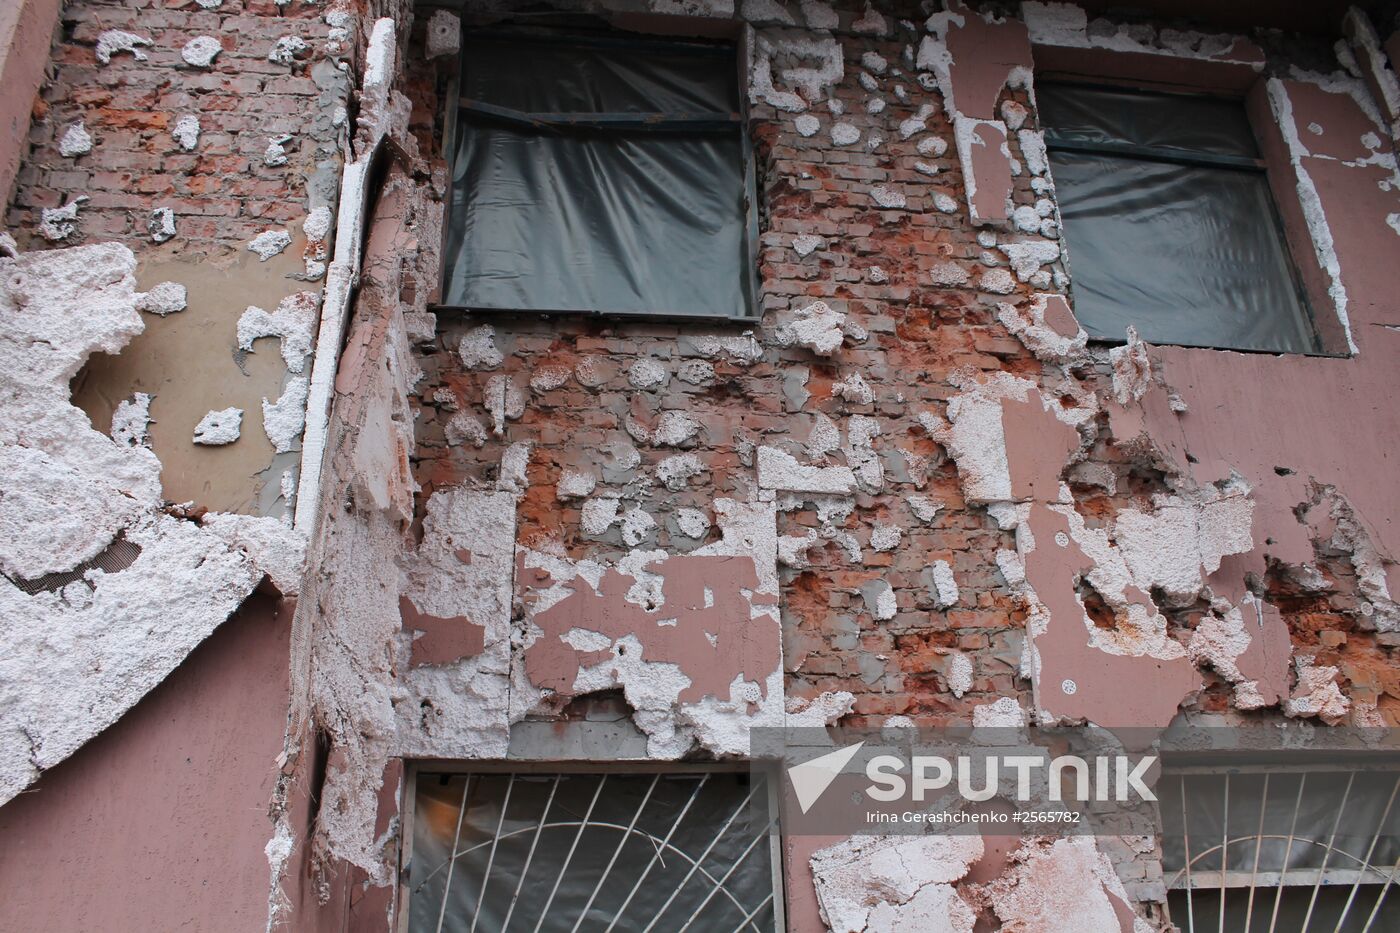 Consequences of artillery strike in Donetsk